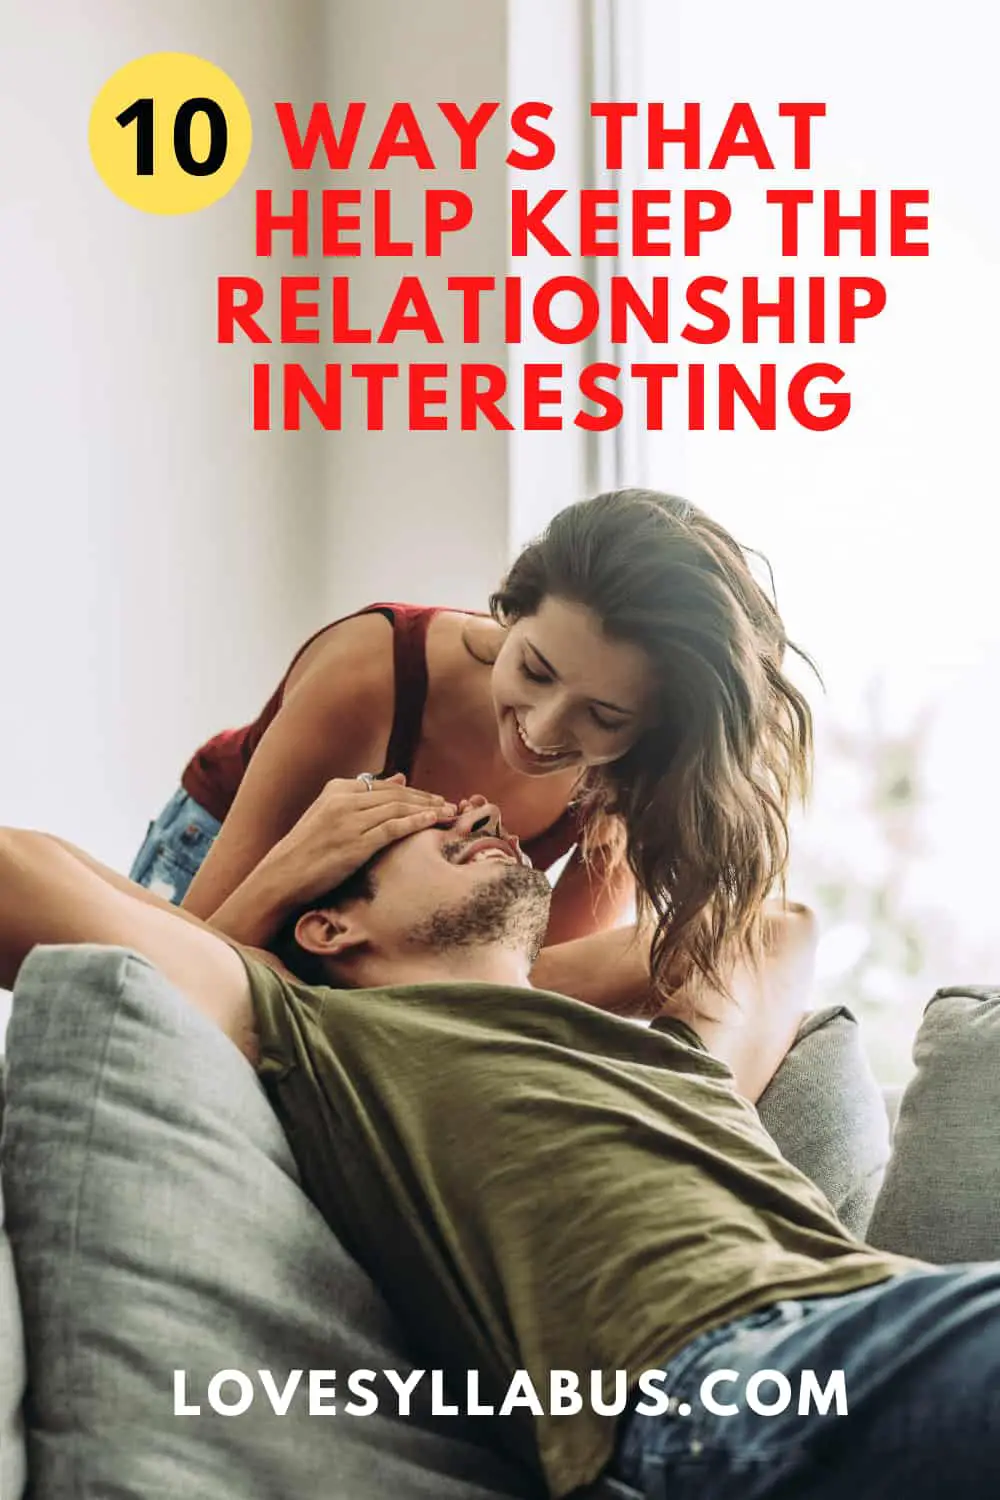 10 Super Easy Ways to Keep The Relationship Interesting